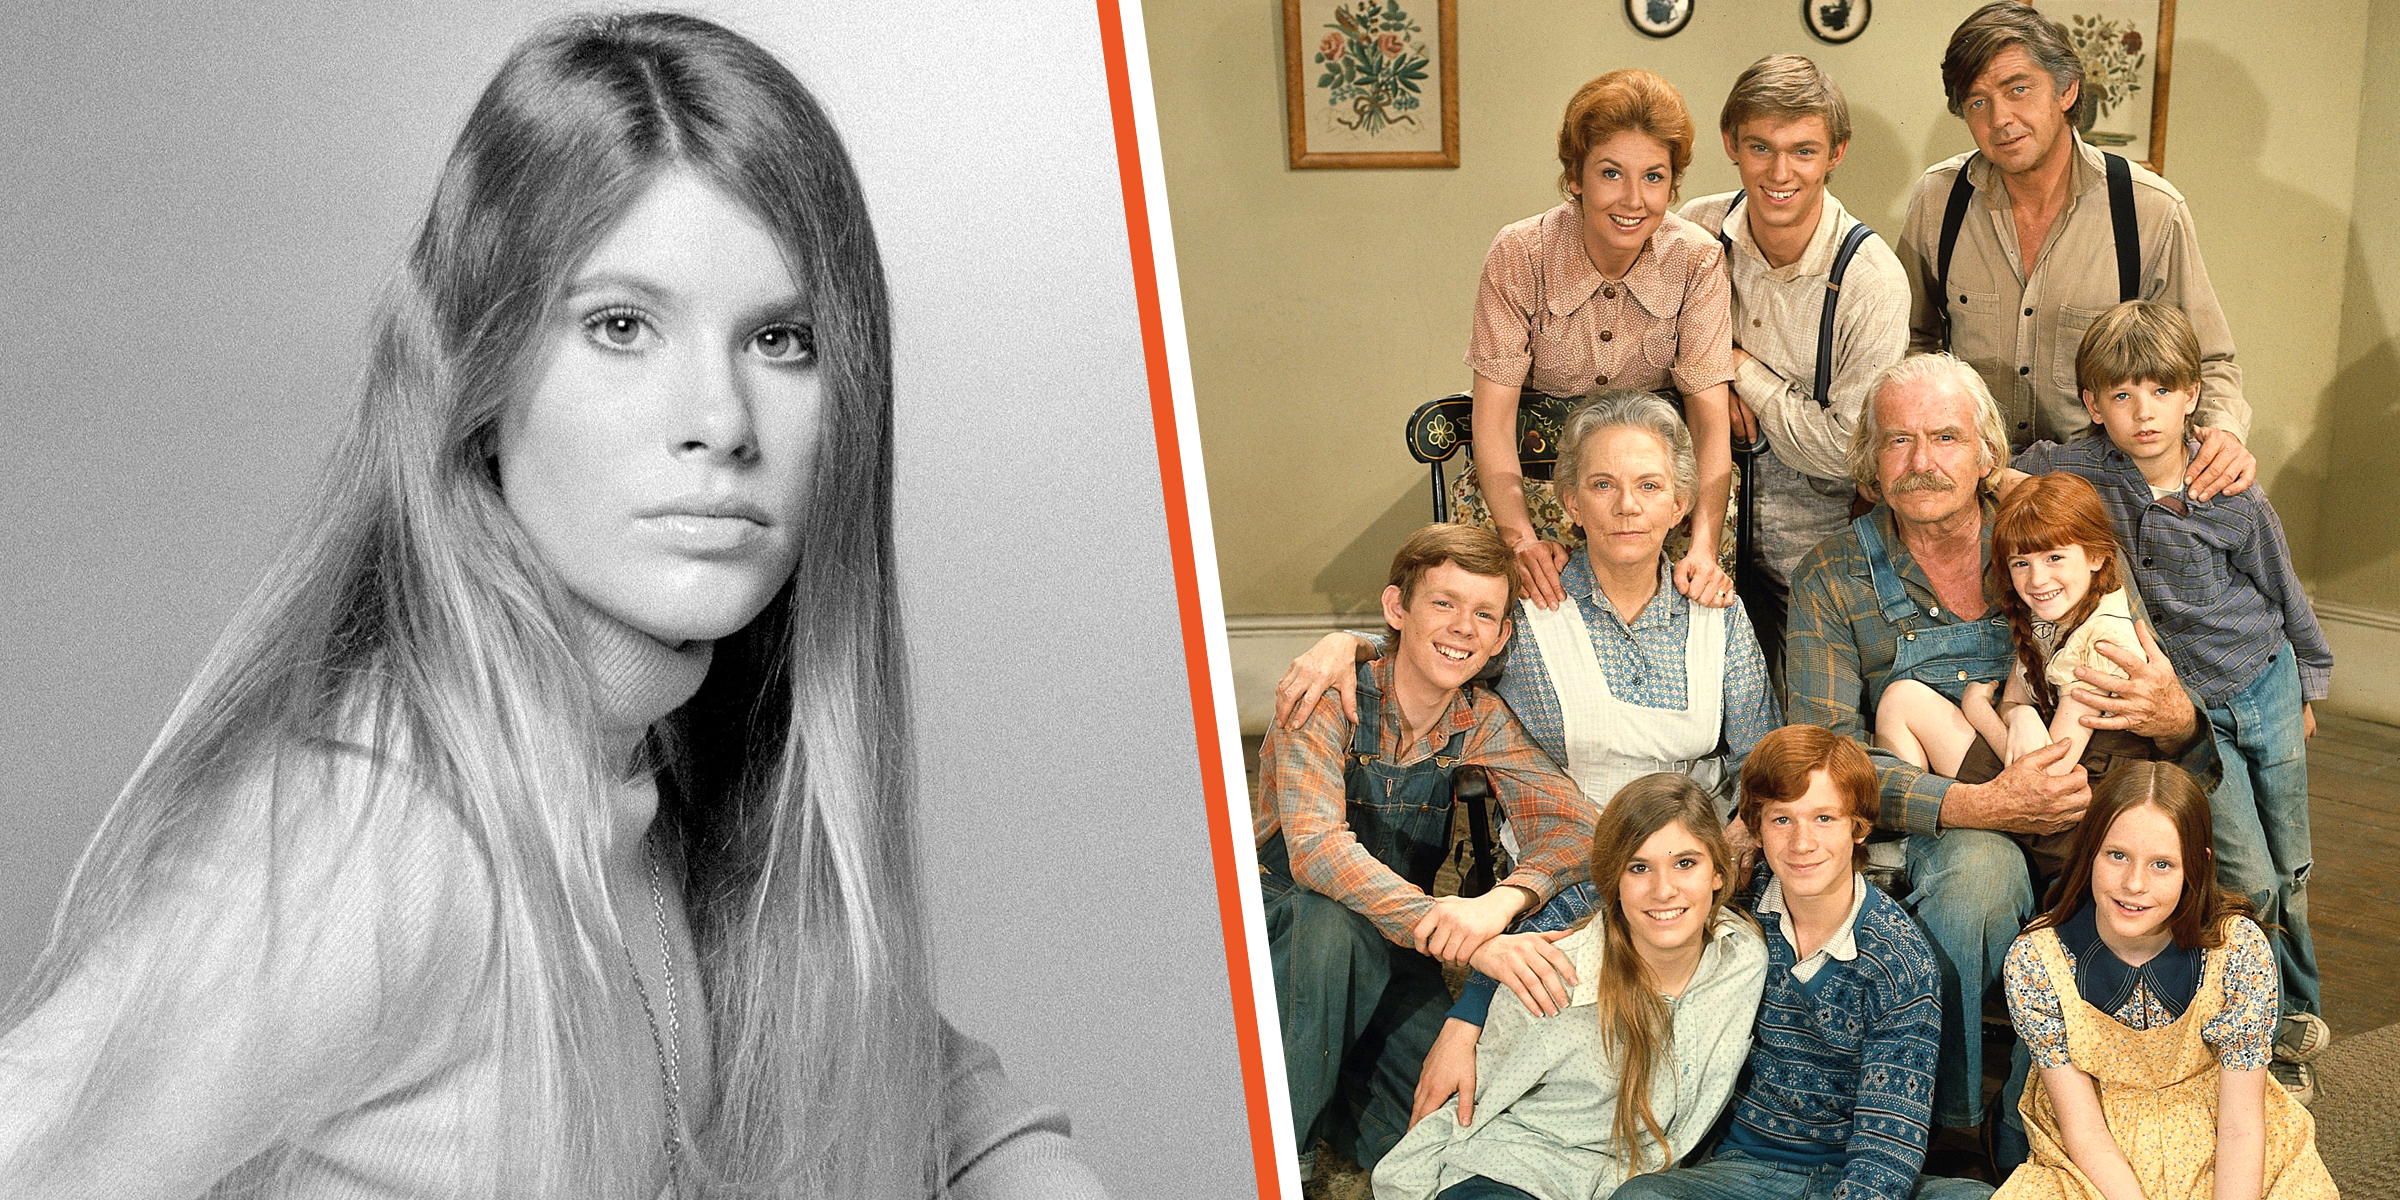 Judy Norton | Judy Norton and the cast of "The Waltons" | Source: Getty Images